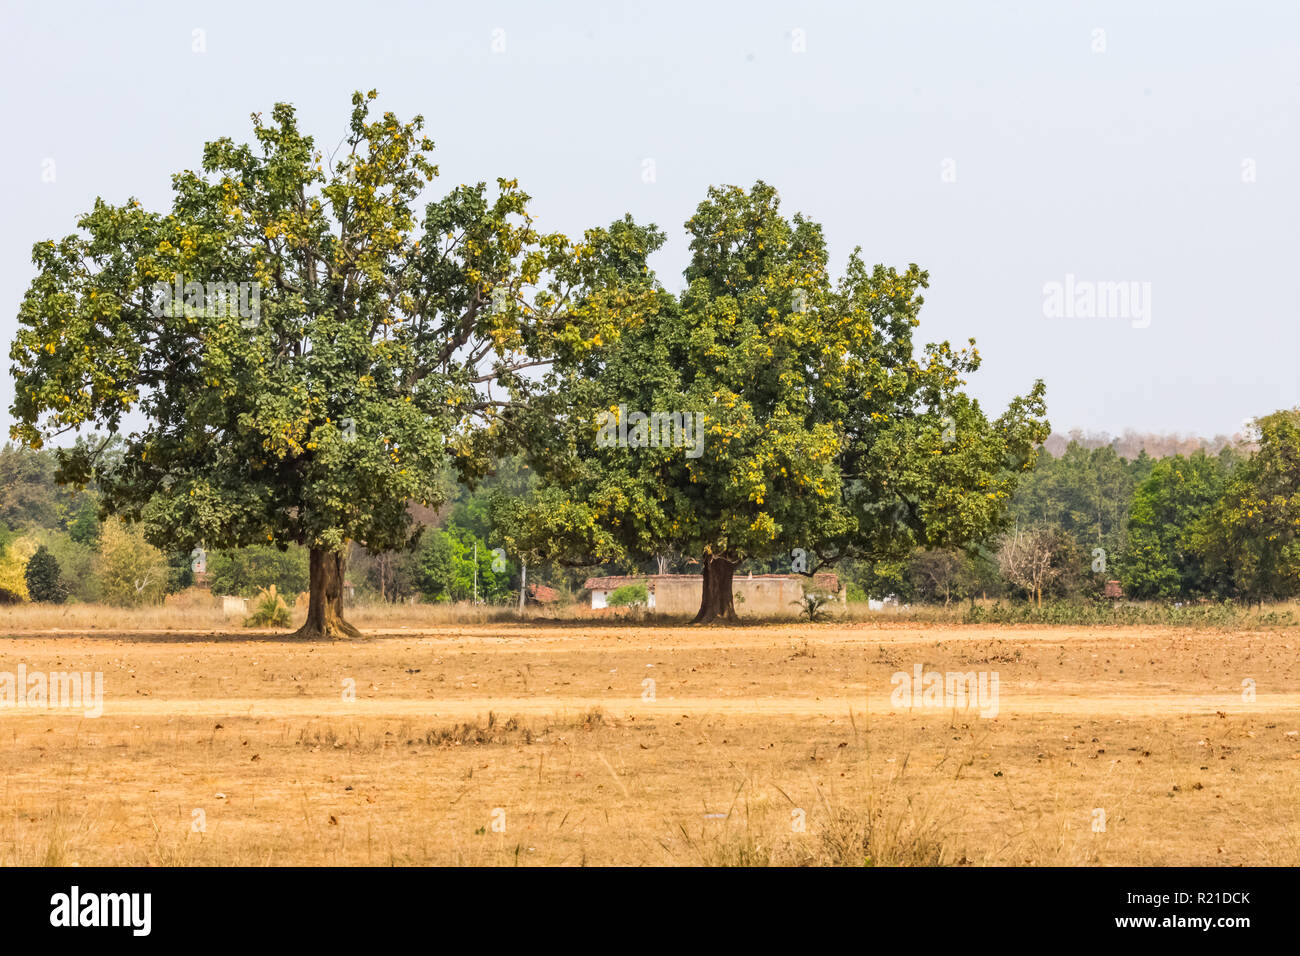 An couple of Indian tree mahuaa close view in a rural field looking awesome. Stock Photo